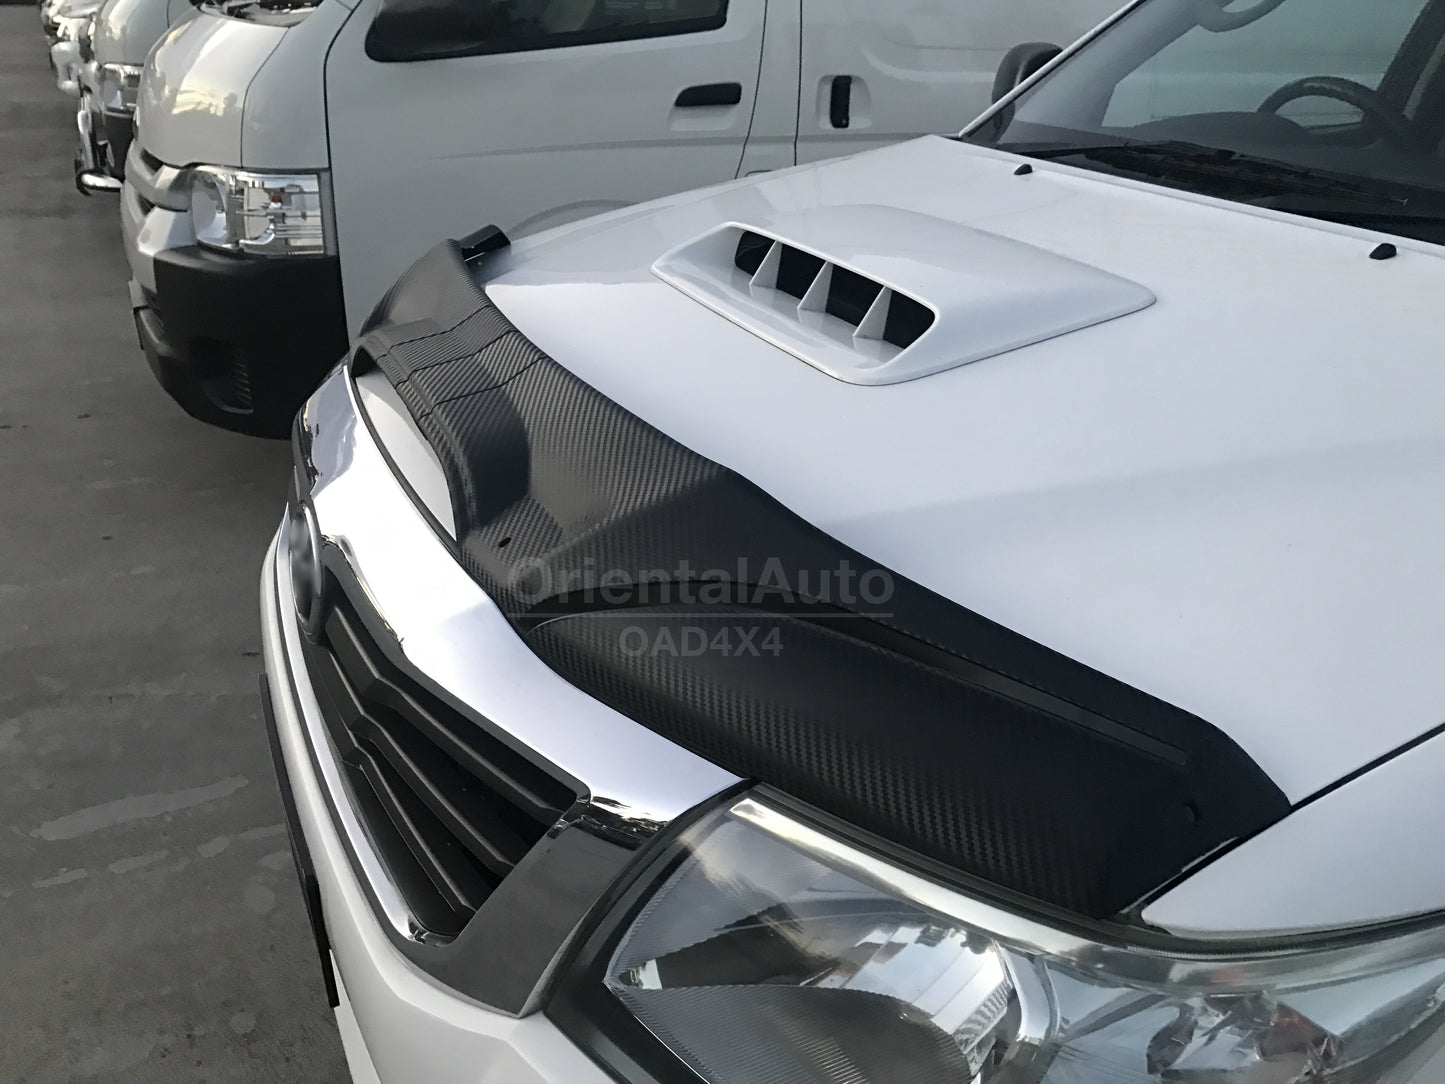 Injection Modeling Bonnet Protector & Luxury Weathershield for Toyota Hilux Single / Extra Cab 2011-2015 2pcs Weather Shields Window Visor Hood Protector Bonnet Guard